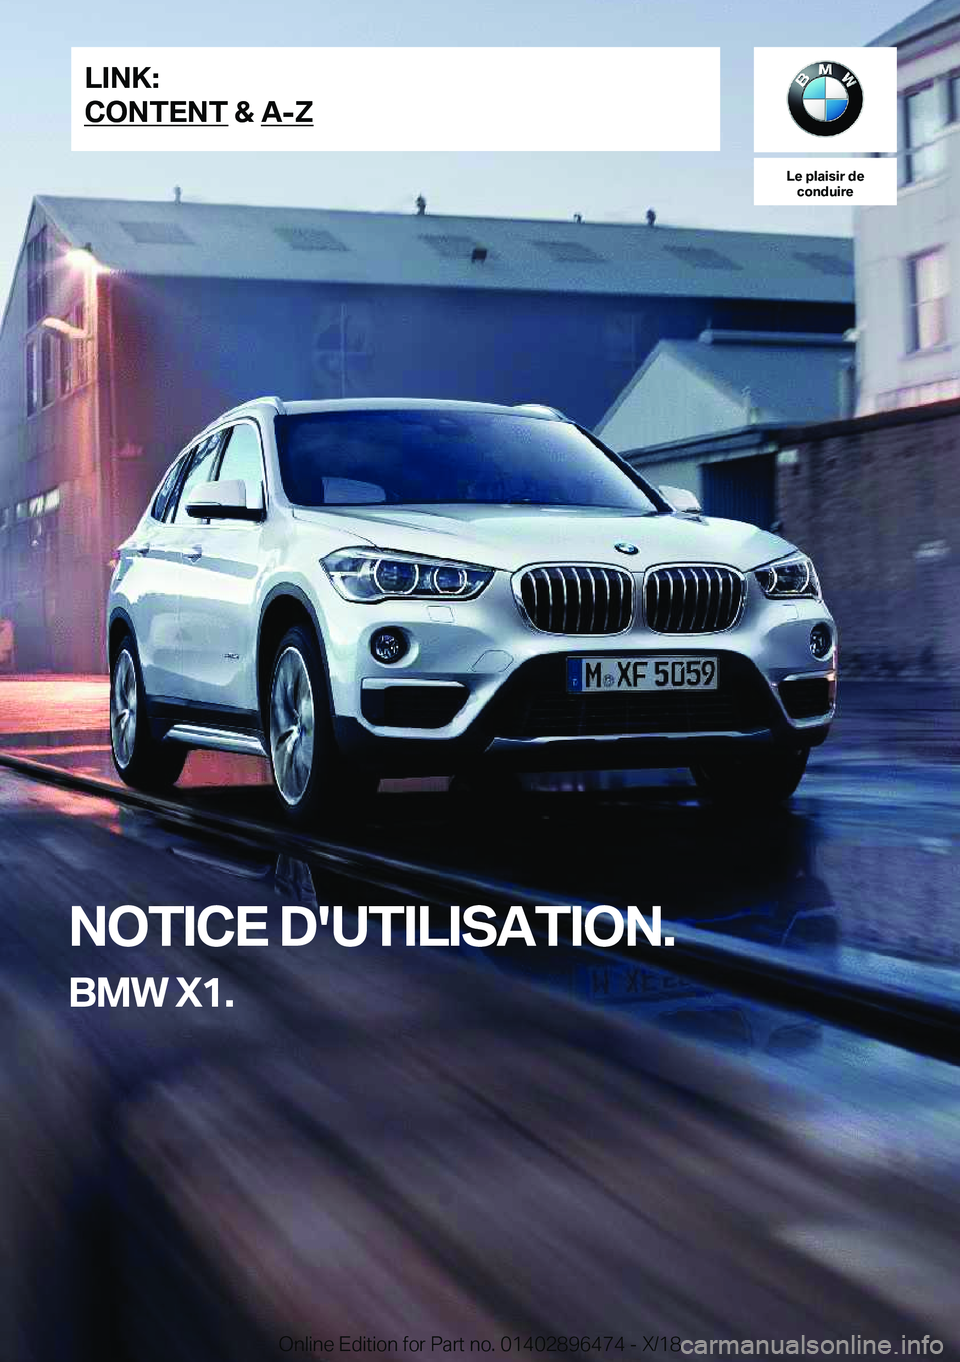 BMW X1 2019  Notices Demploi (in French) �L�e��p�l�a�i�s�i�r��d�e�c�o�n�d�u�i�r�e
�N�O�T�I�C�E��D�'�U�T�I�L�I�S�A�T�I�O�N�.
�B�M�W��X�1�.�L�I�N�K�:
�C�O�N�T�E�N�T��&��A�-�Z�O�n�l�i�n�e��E�d�i�t�i�o�n��f�o�r��P�a�r�t��n�o�.��0�